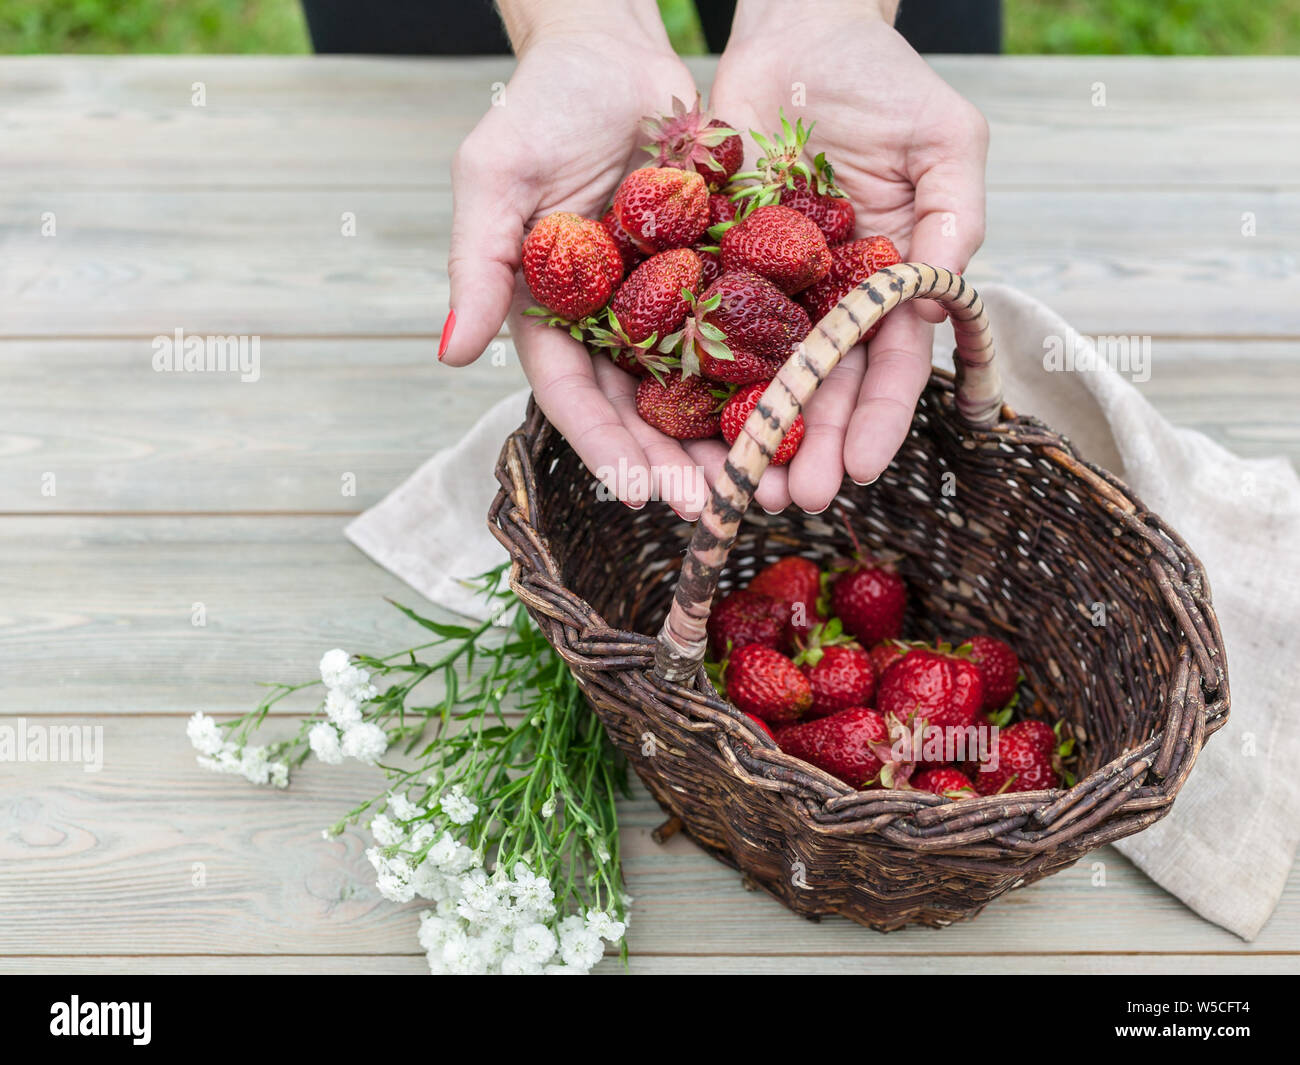 Women hands hold ripe strawberries. Strawberries in a basket. Summer food composition on a wooden table. Stock Photo